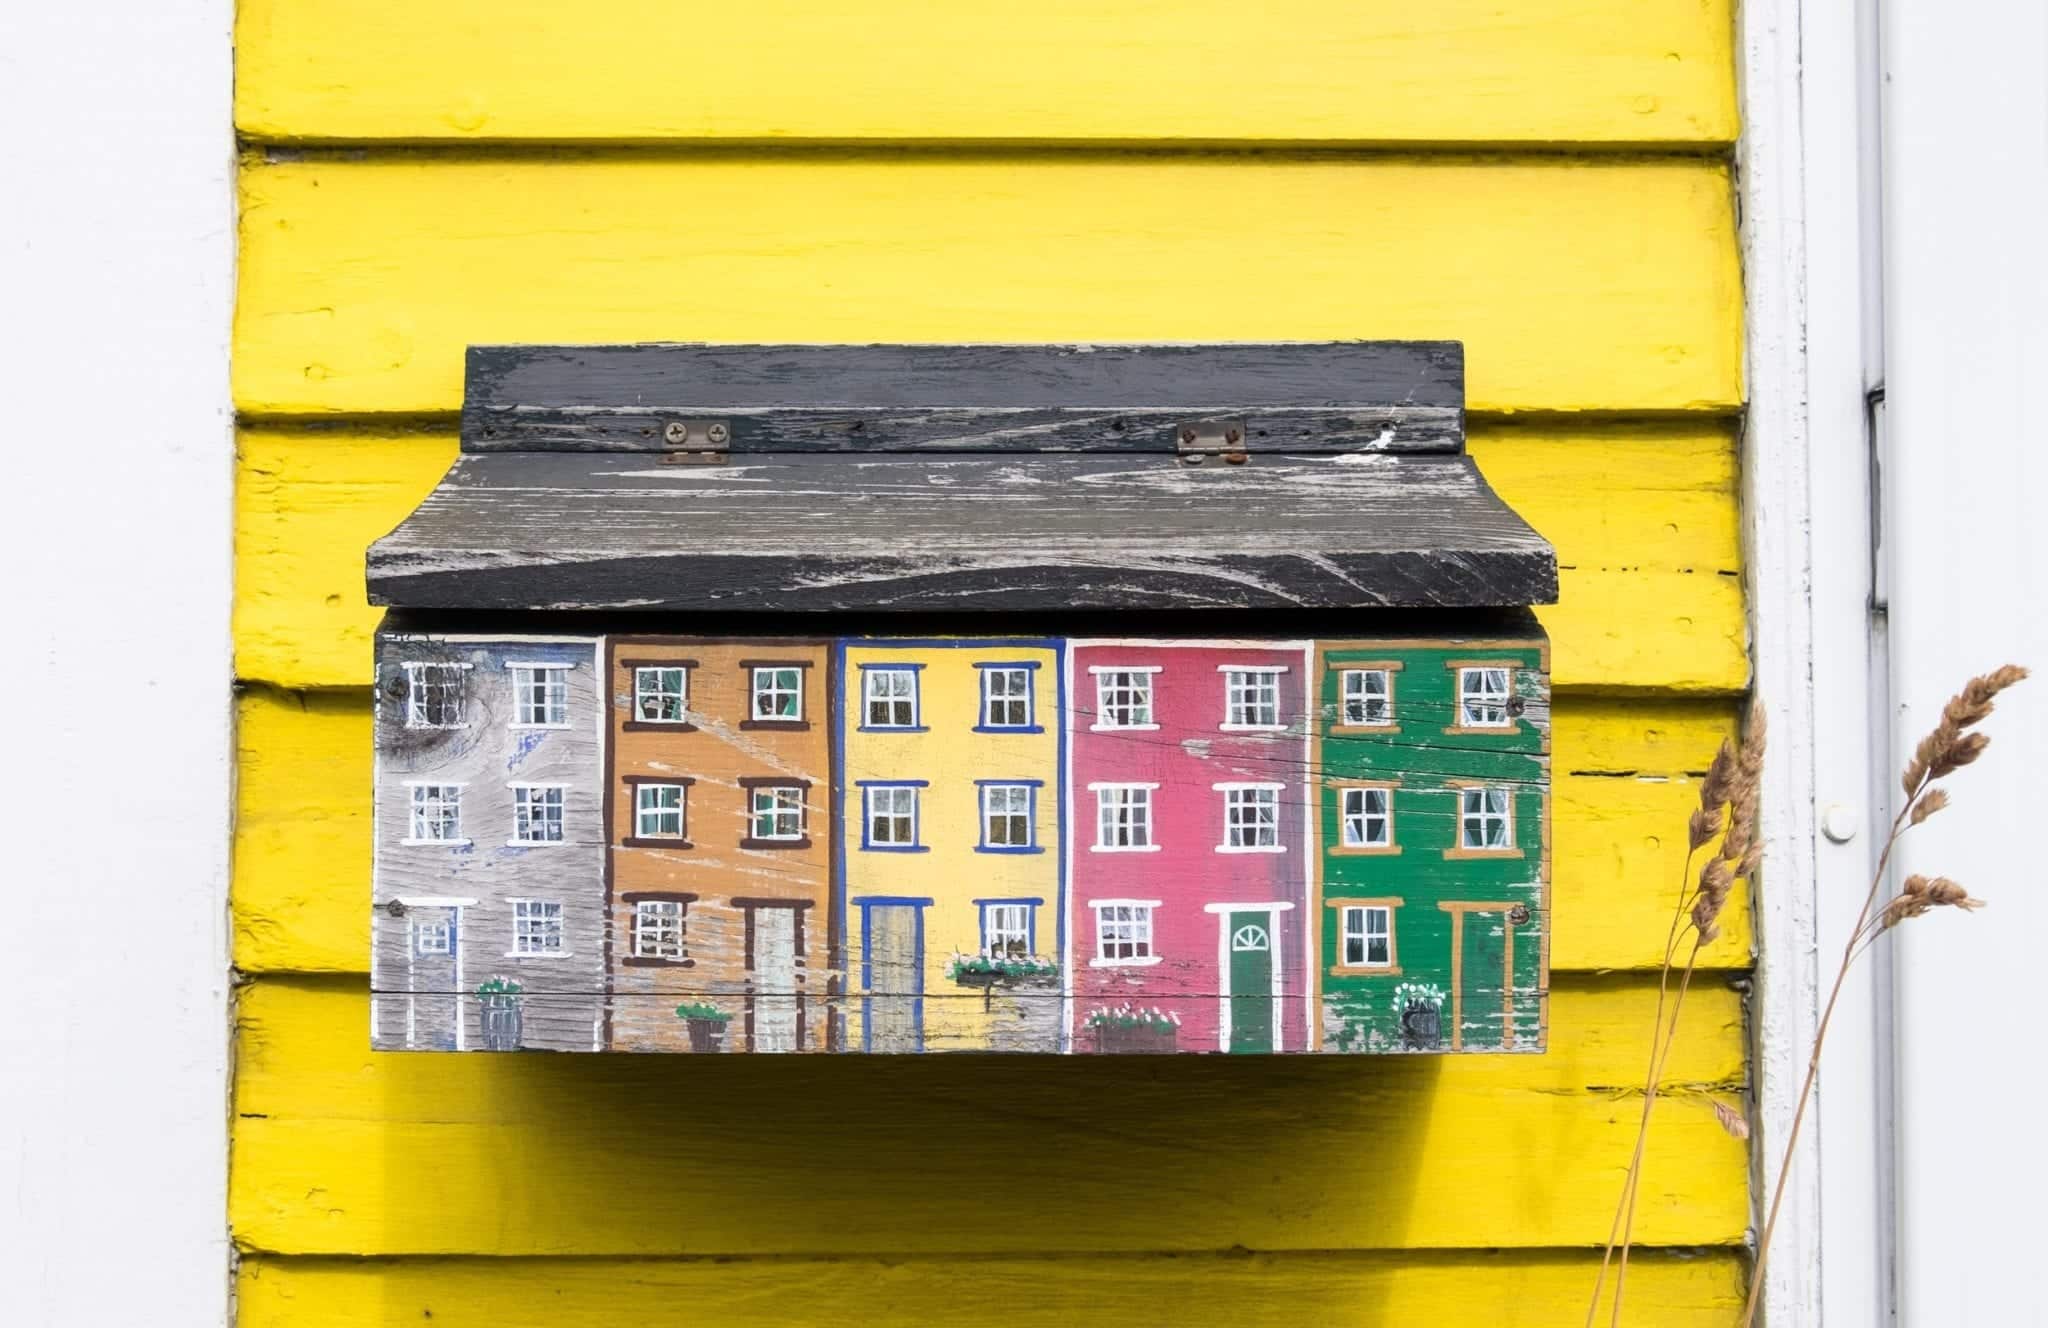 A mailbox shaped and painted like the houses of Jelly Bean Row, attached to a yellow house.